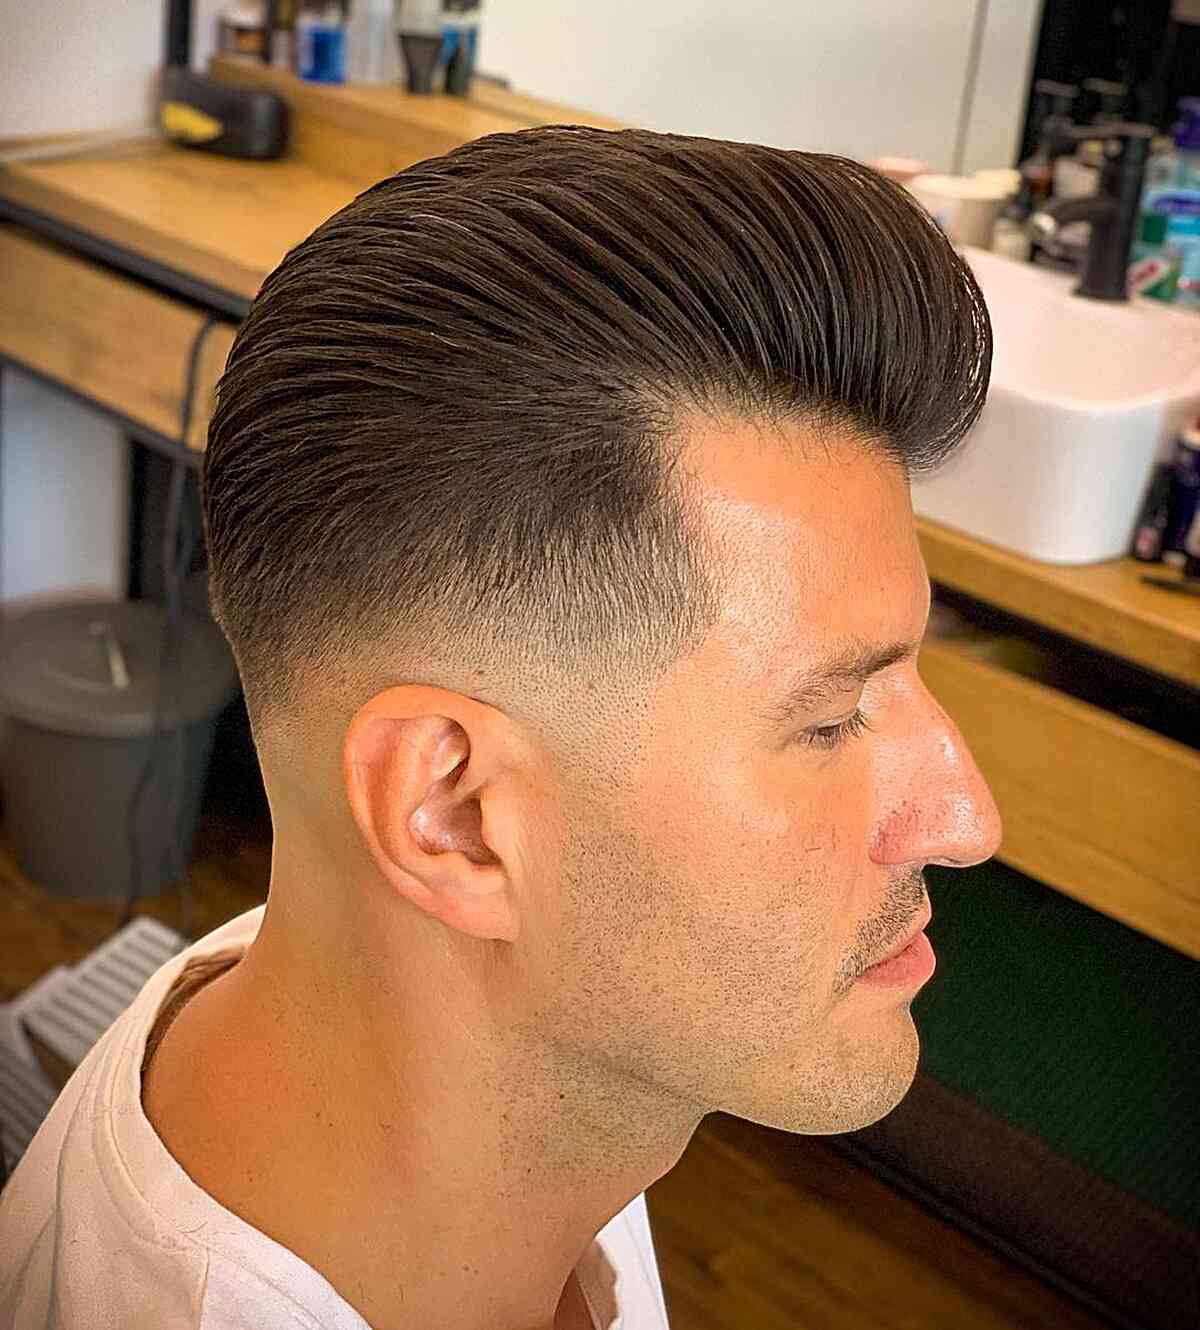 Low Bald Fade on Short Hair